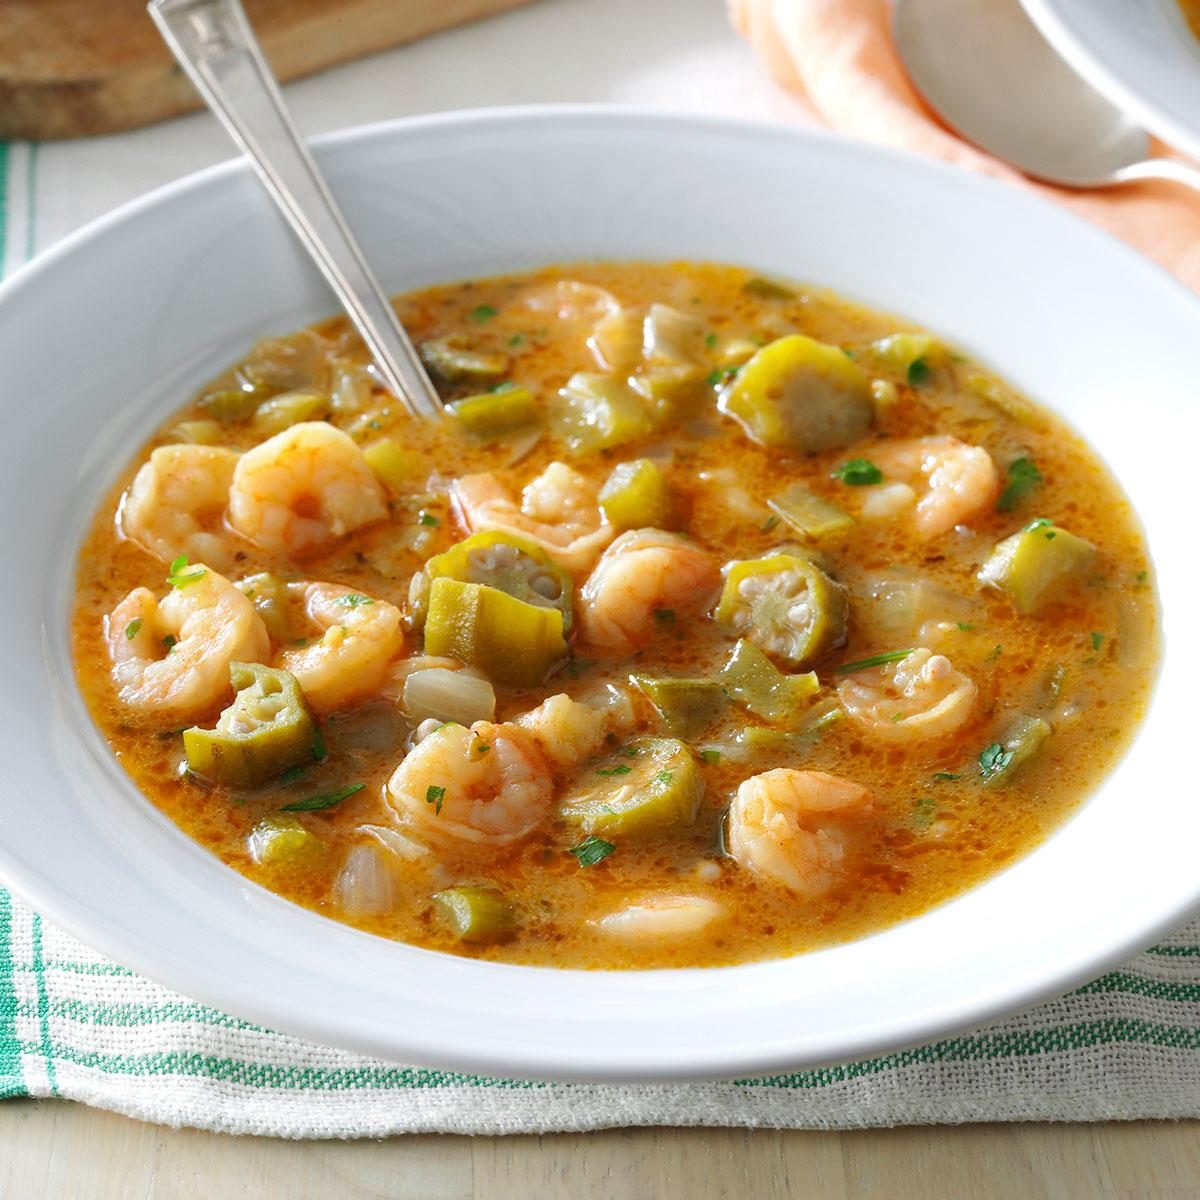 https://www.tasteofhome.com/wp-content/uploads/2018/01/Seafood-Gumbo_exps3415_SF143315D11_05_4b_RMS-13.jpg